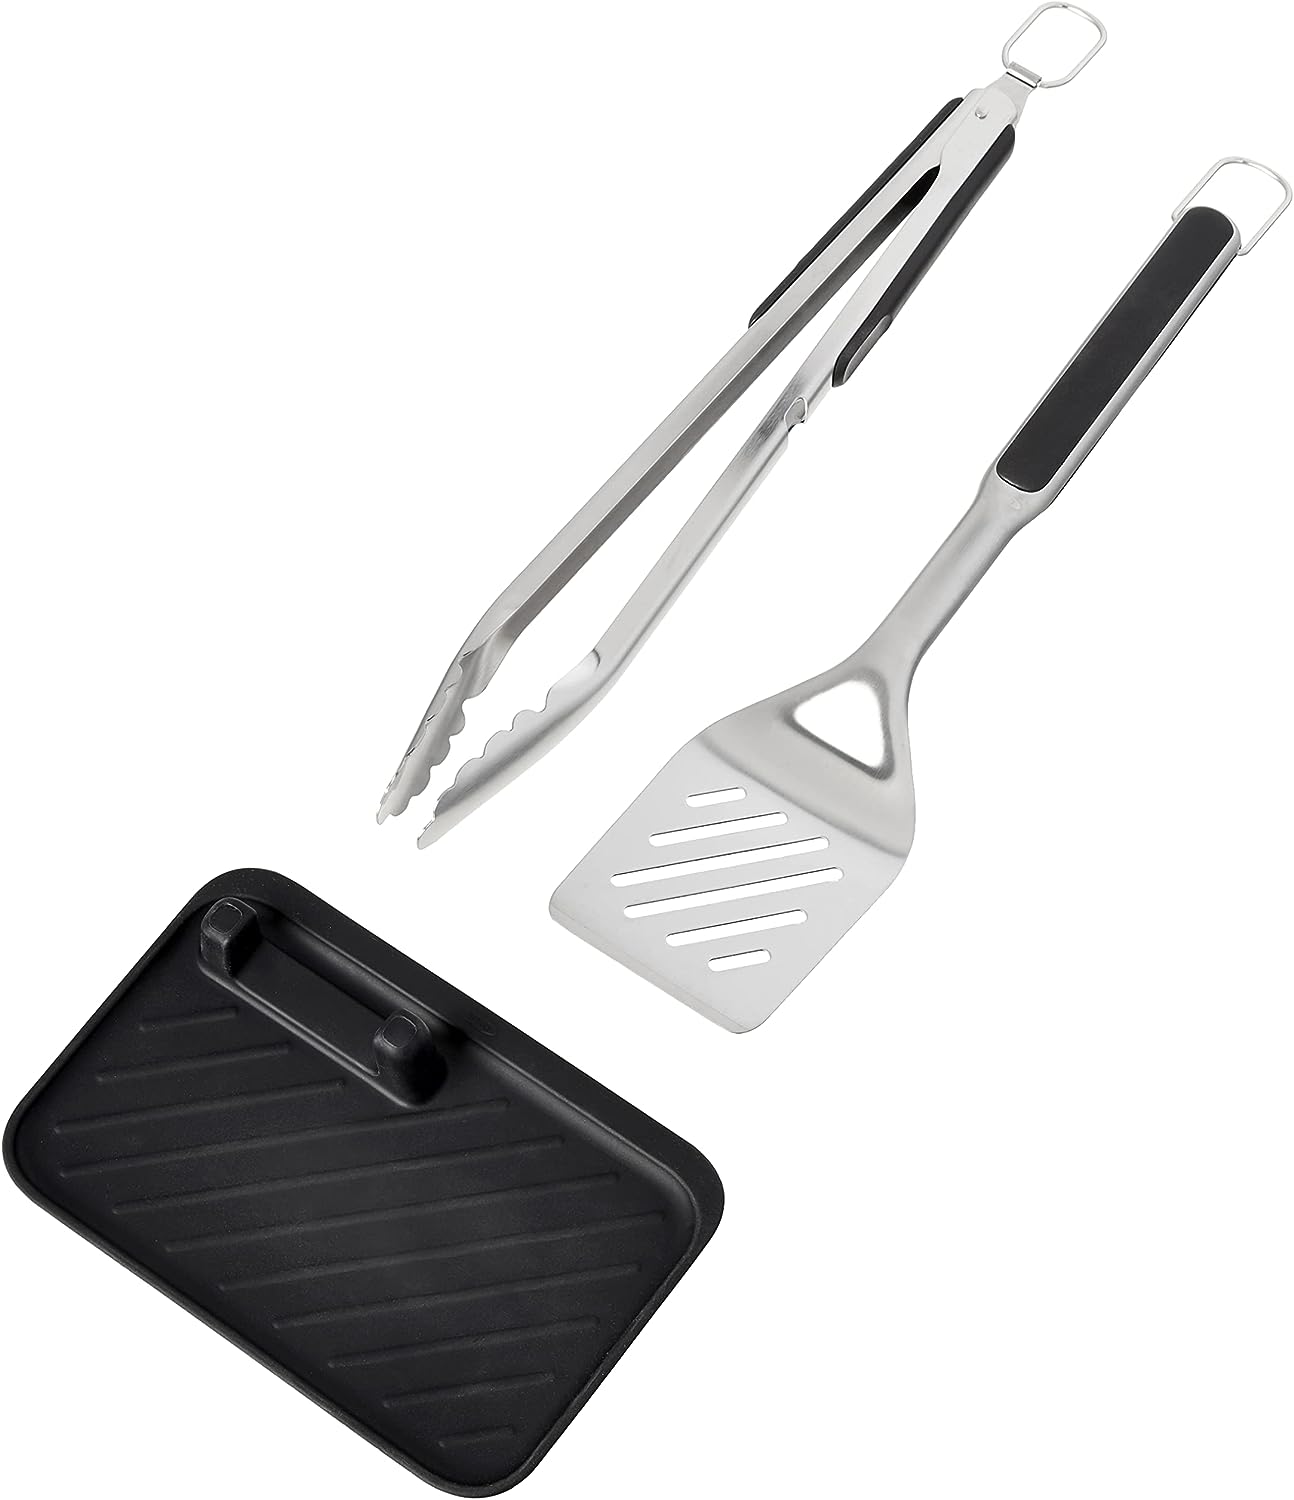 Oxo Good Grips 3 Pc Grilling Set